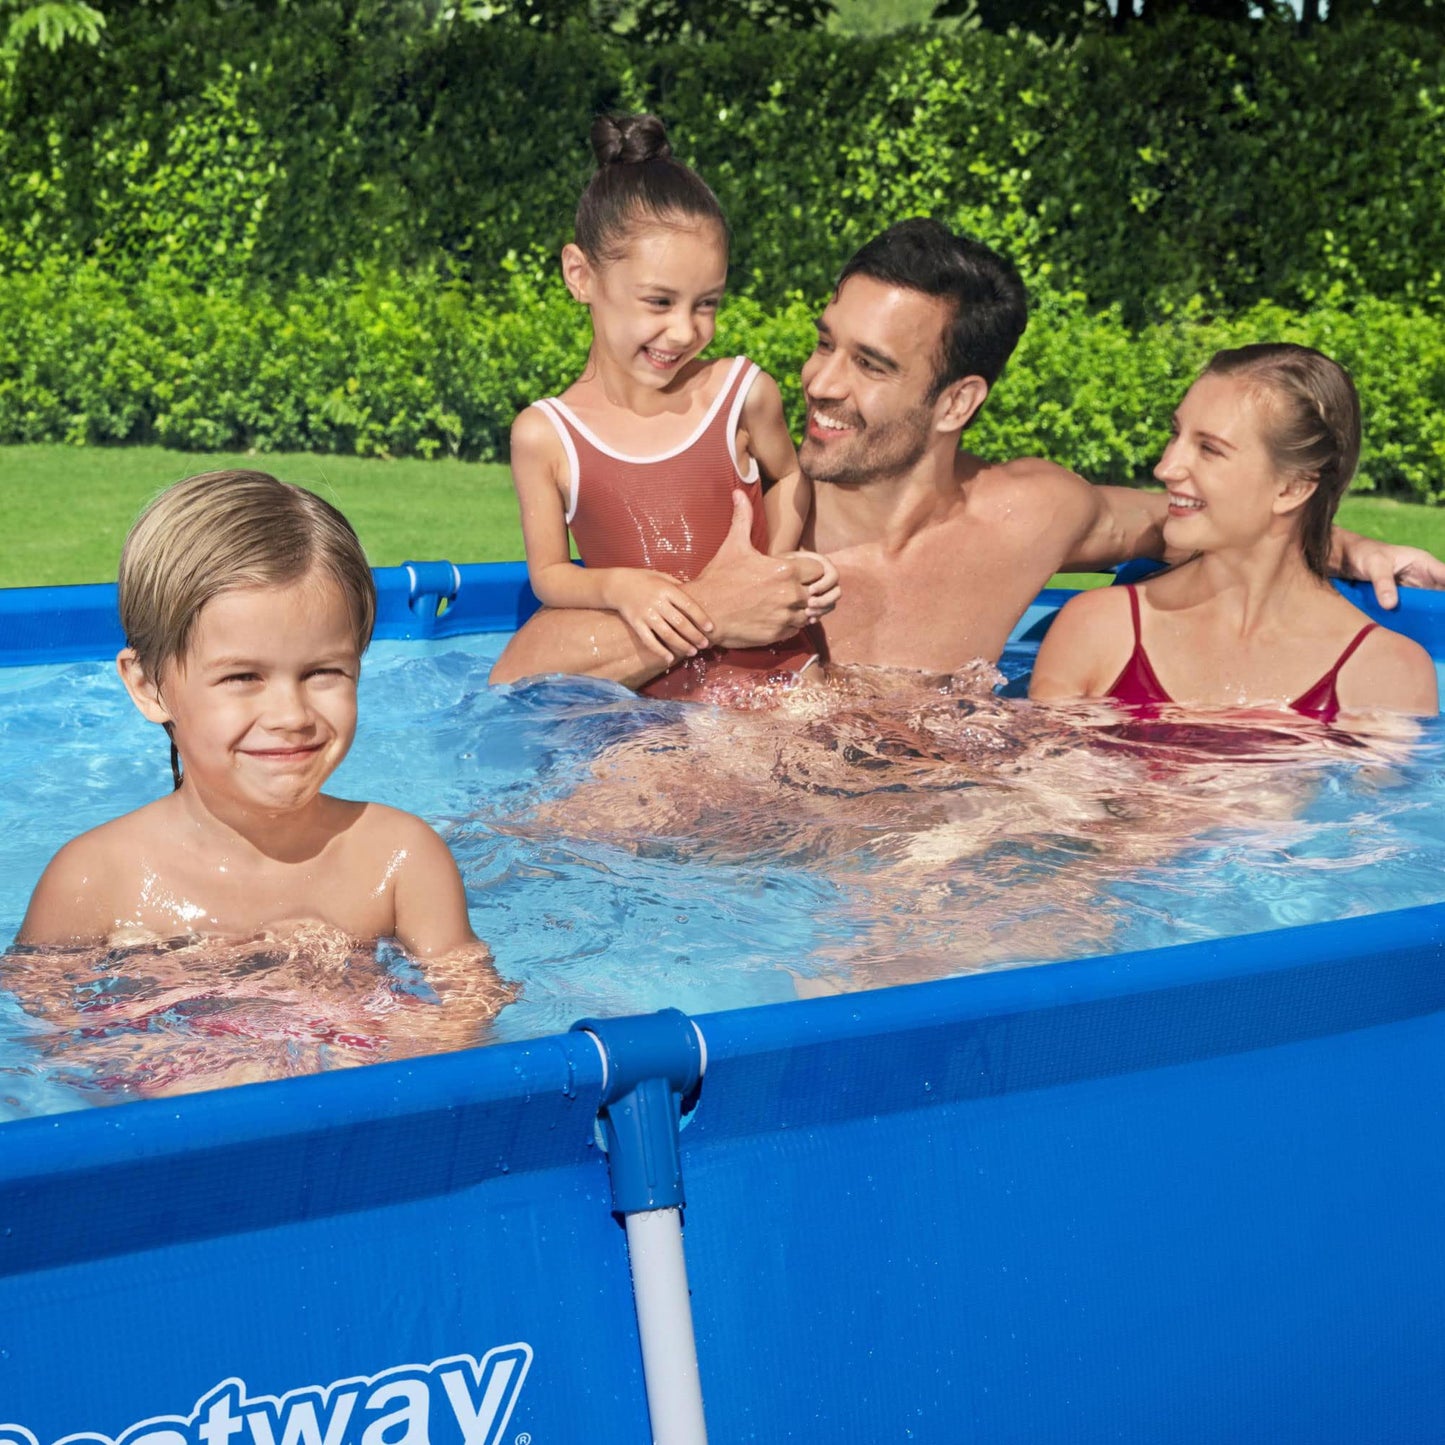 Bestway Steel Pro 8.5 Feet x 67 Inch x 24 Inch Rectangular Steel Frame Above Ground Outdoor Backyard Swimming Pool, Blue (Pool Only) 8.6' x 5.6' x 24"